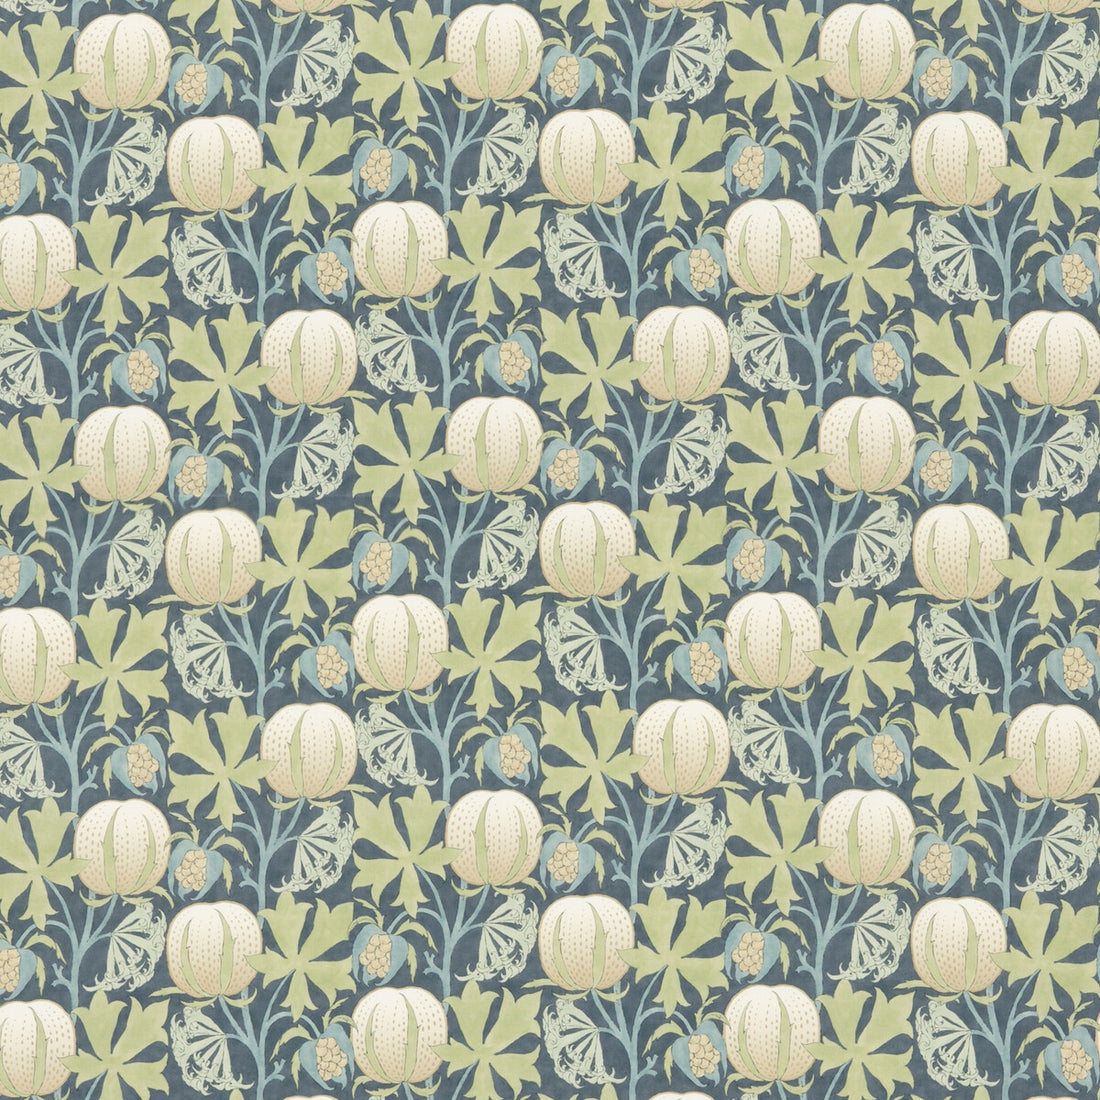 Pumpkins Cotton fabric in green/blue color - pattern BP10973.2.0 - by G P &amp; J Baker in the Original Brantwood Fabric collection